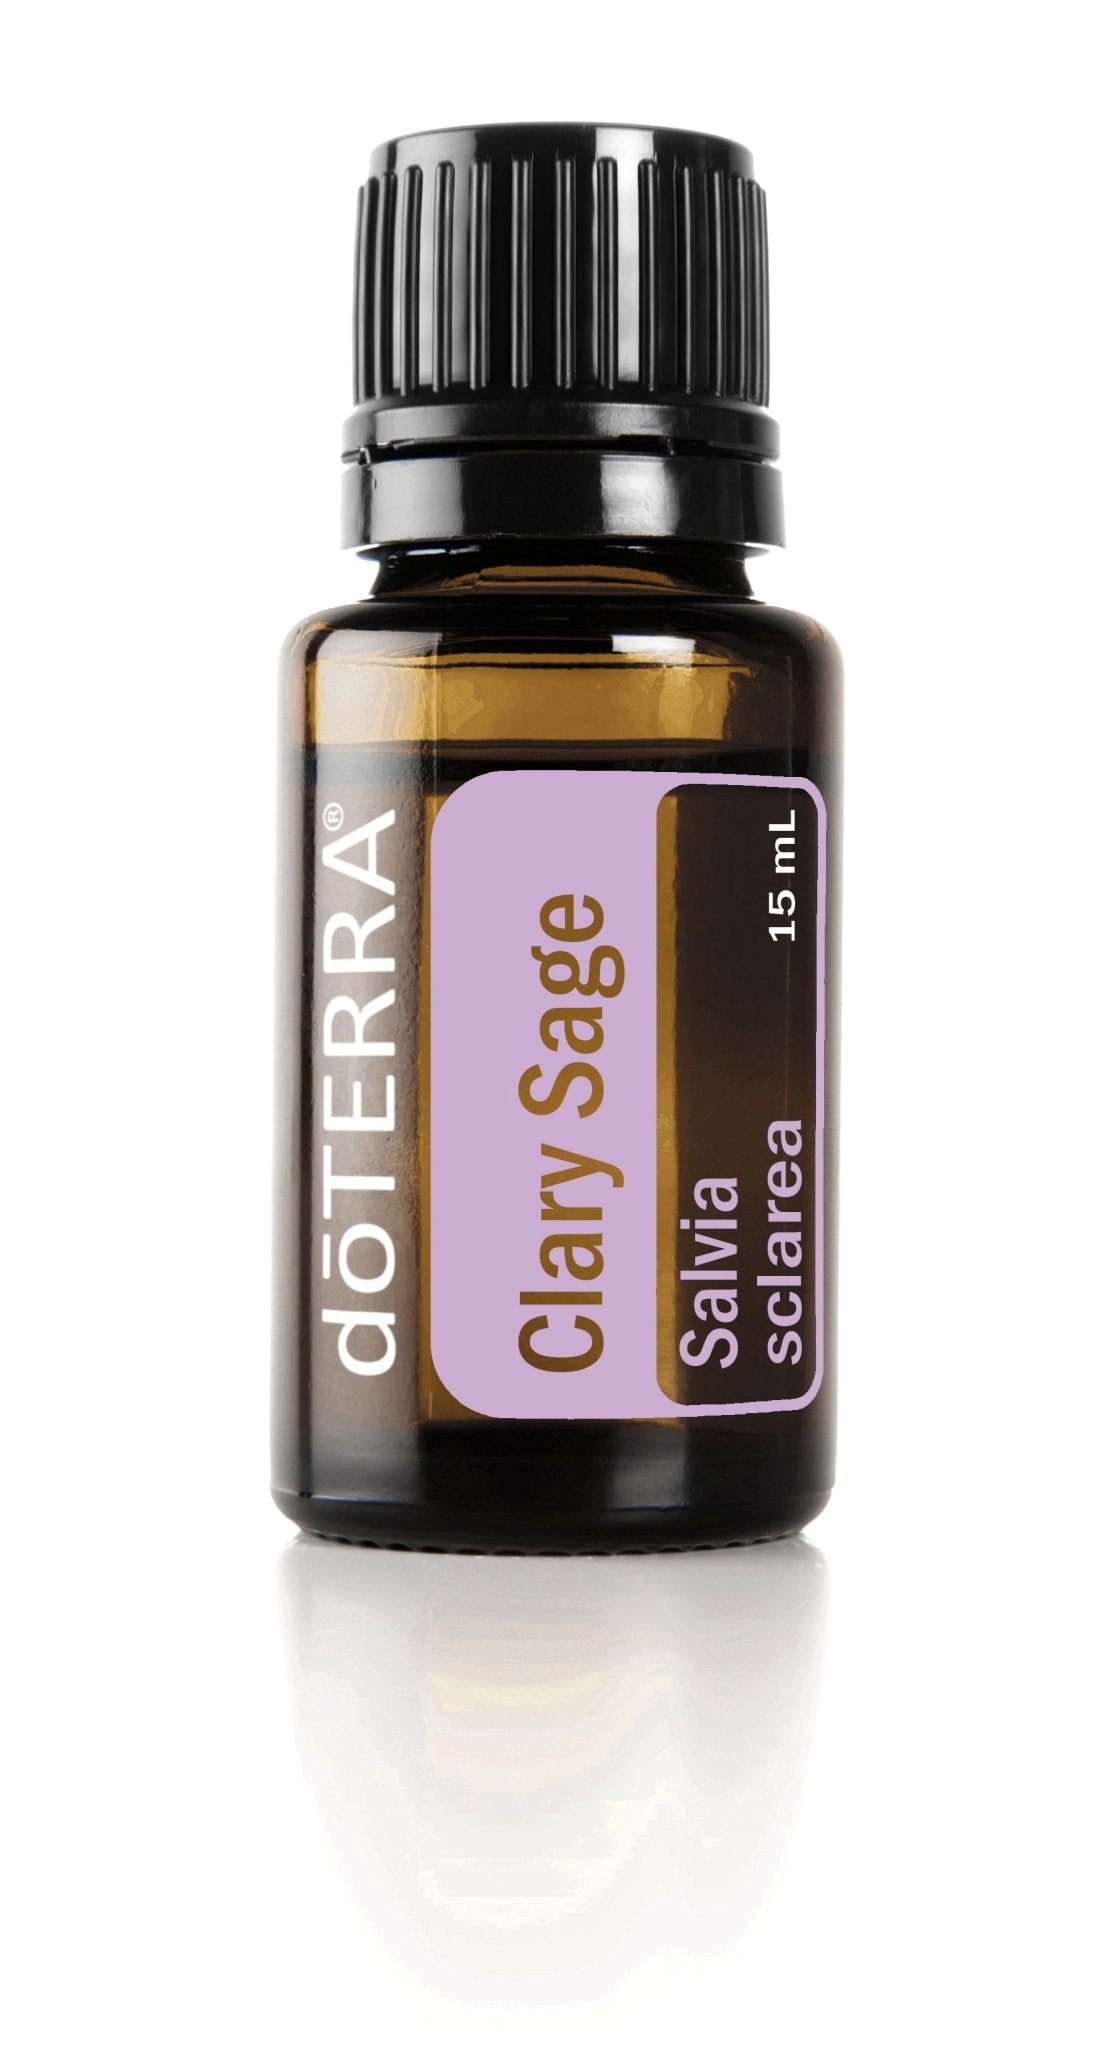 Clary Sage - The Wong Way